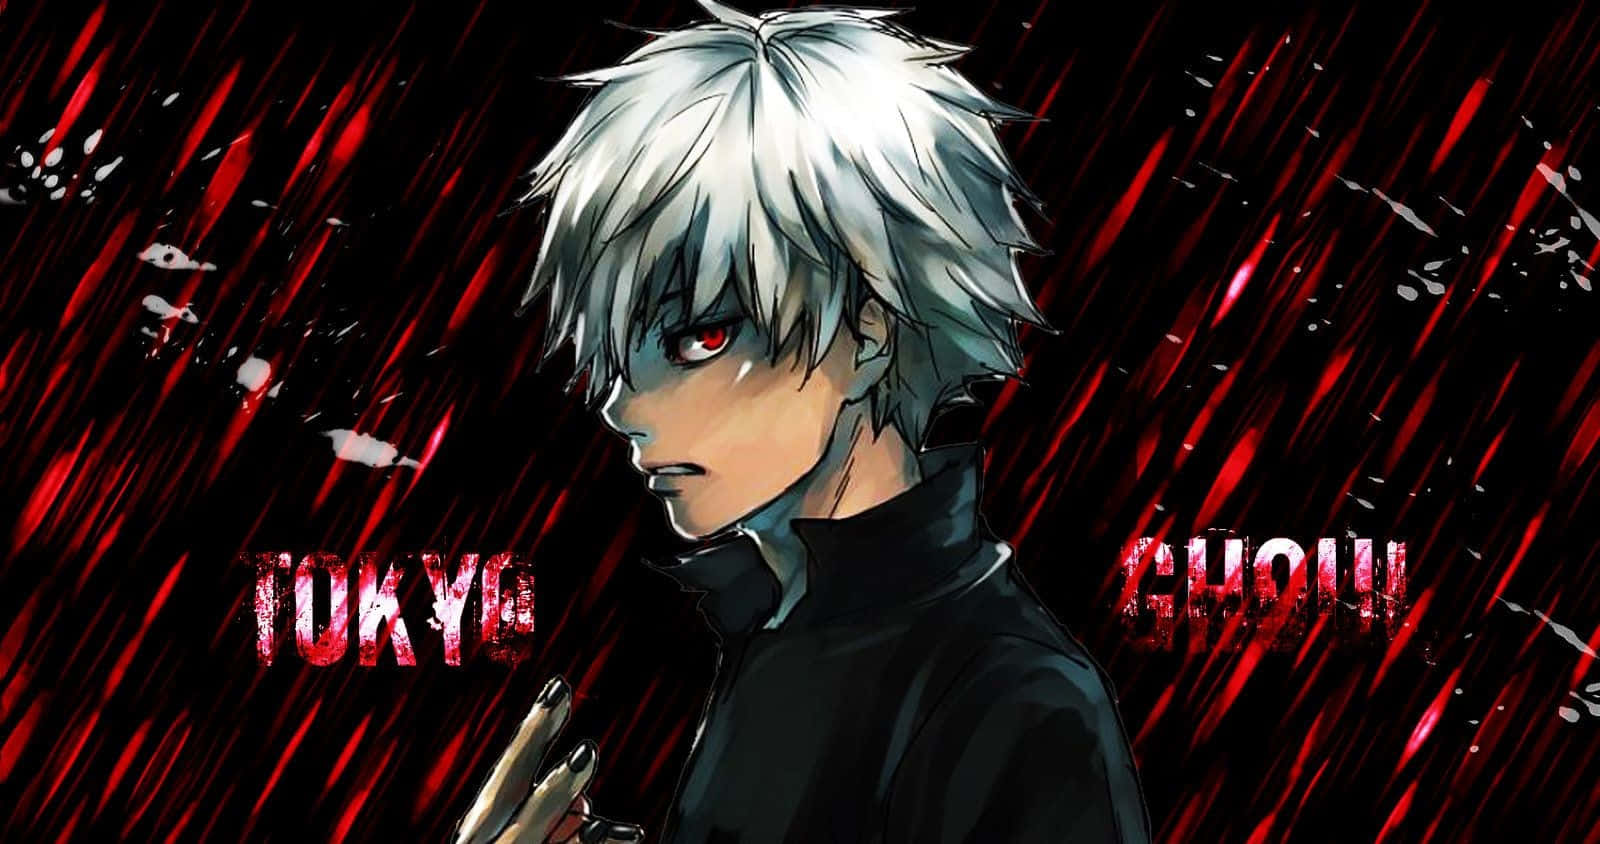 A creature of the dark, Ken Kaneki haunted by his past.